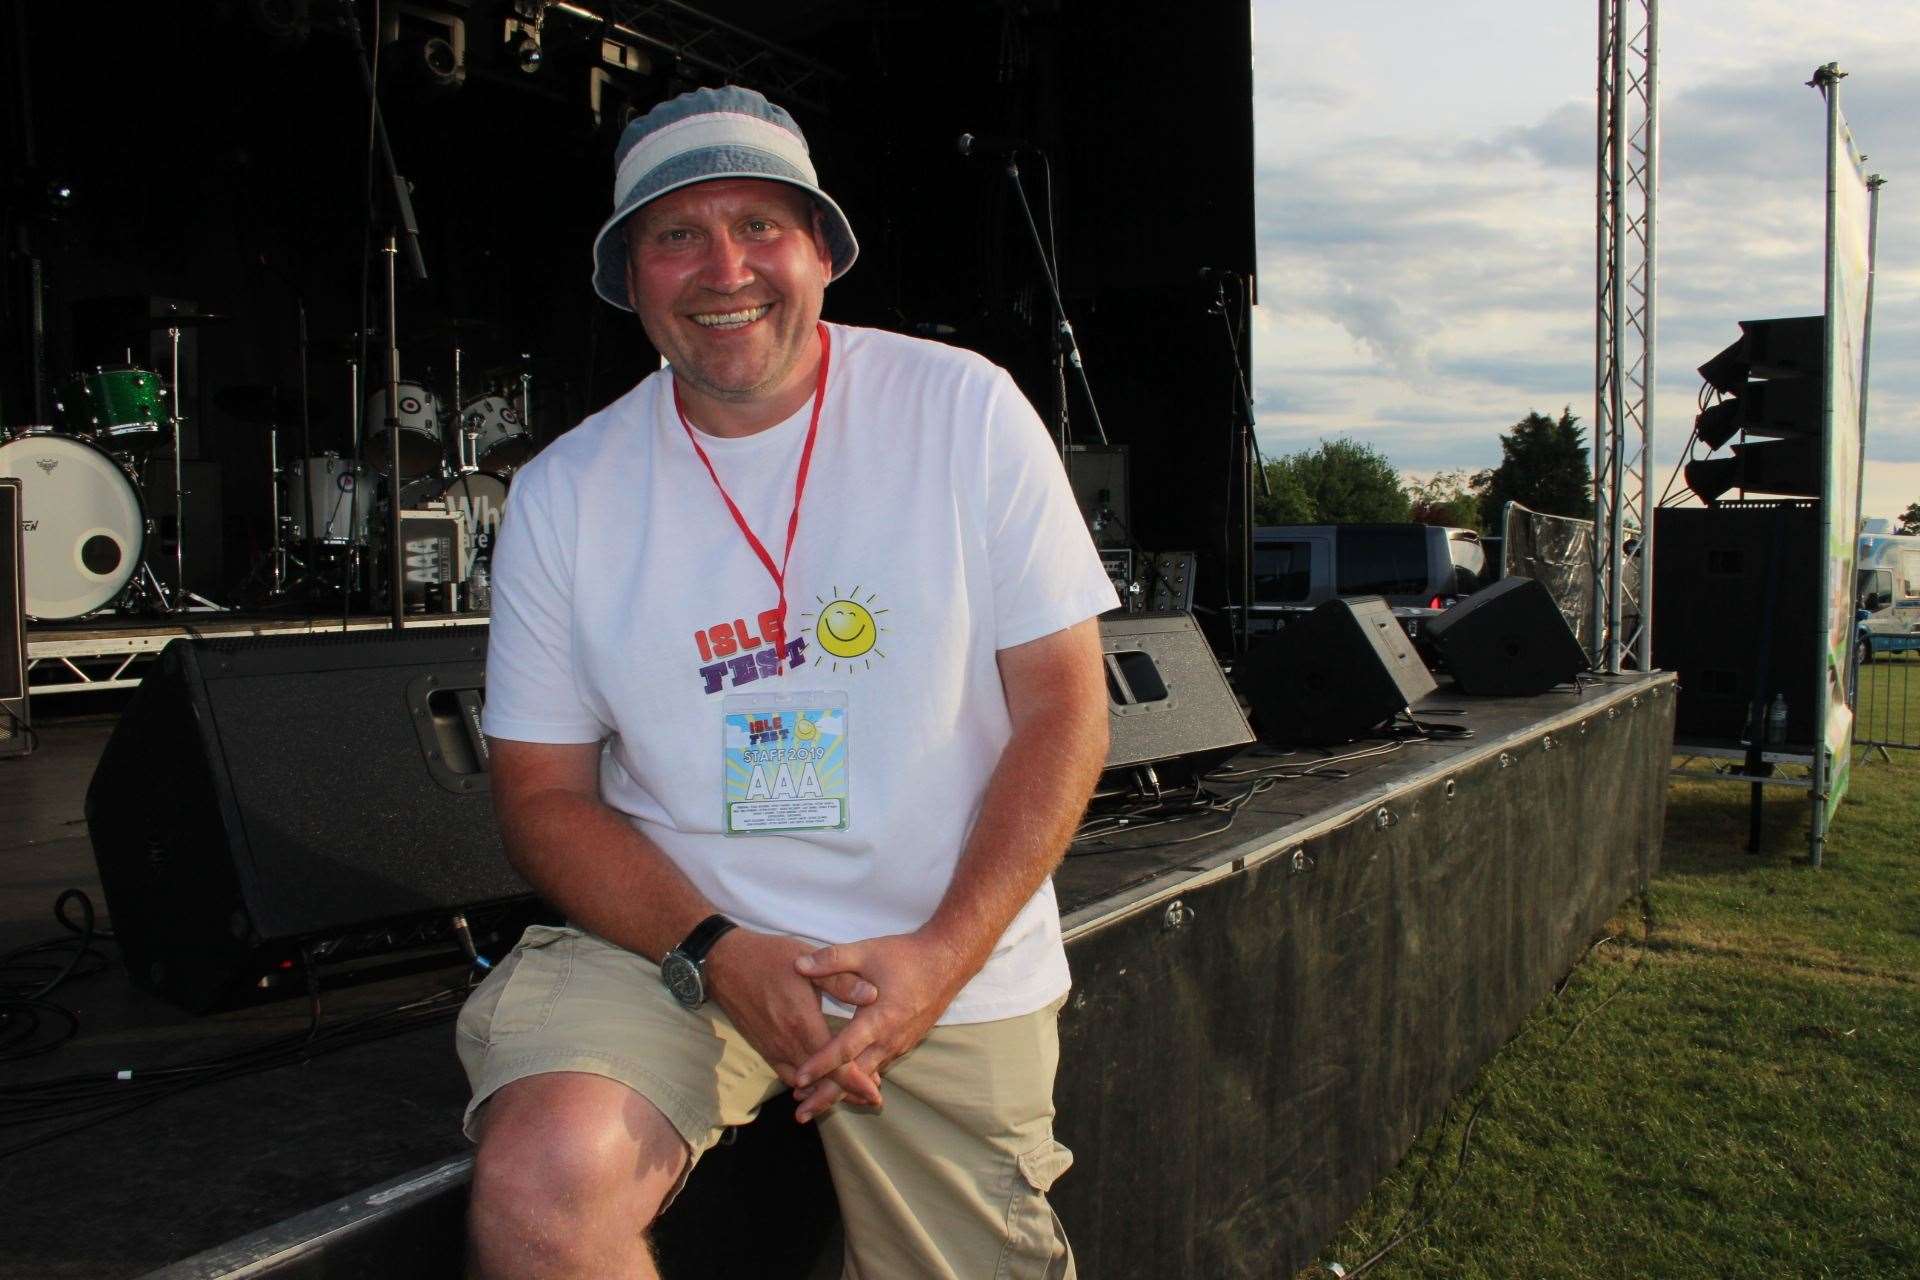 Happier days: Paul Rogers at last year's Isle Fest on the Isle of Sheppey